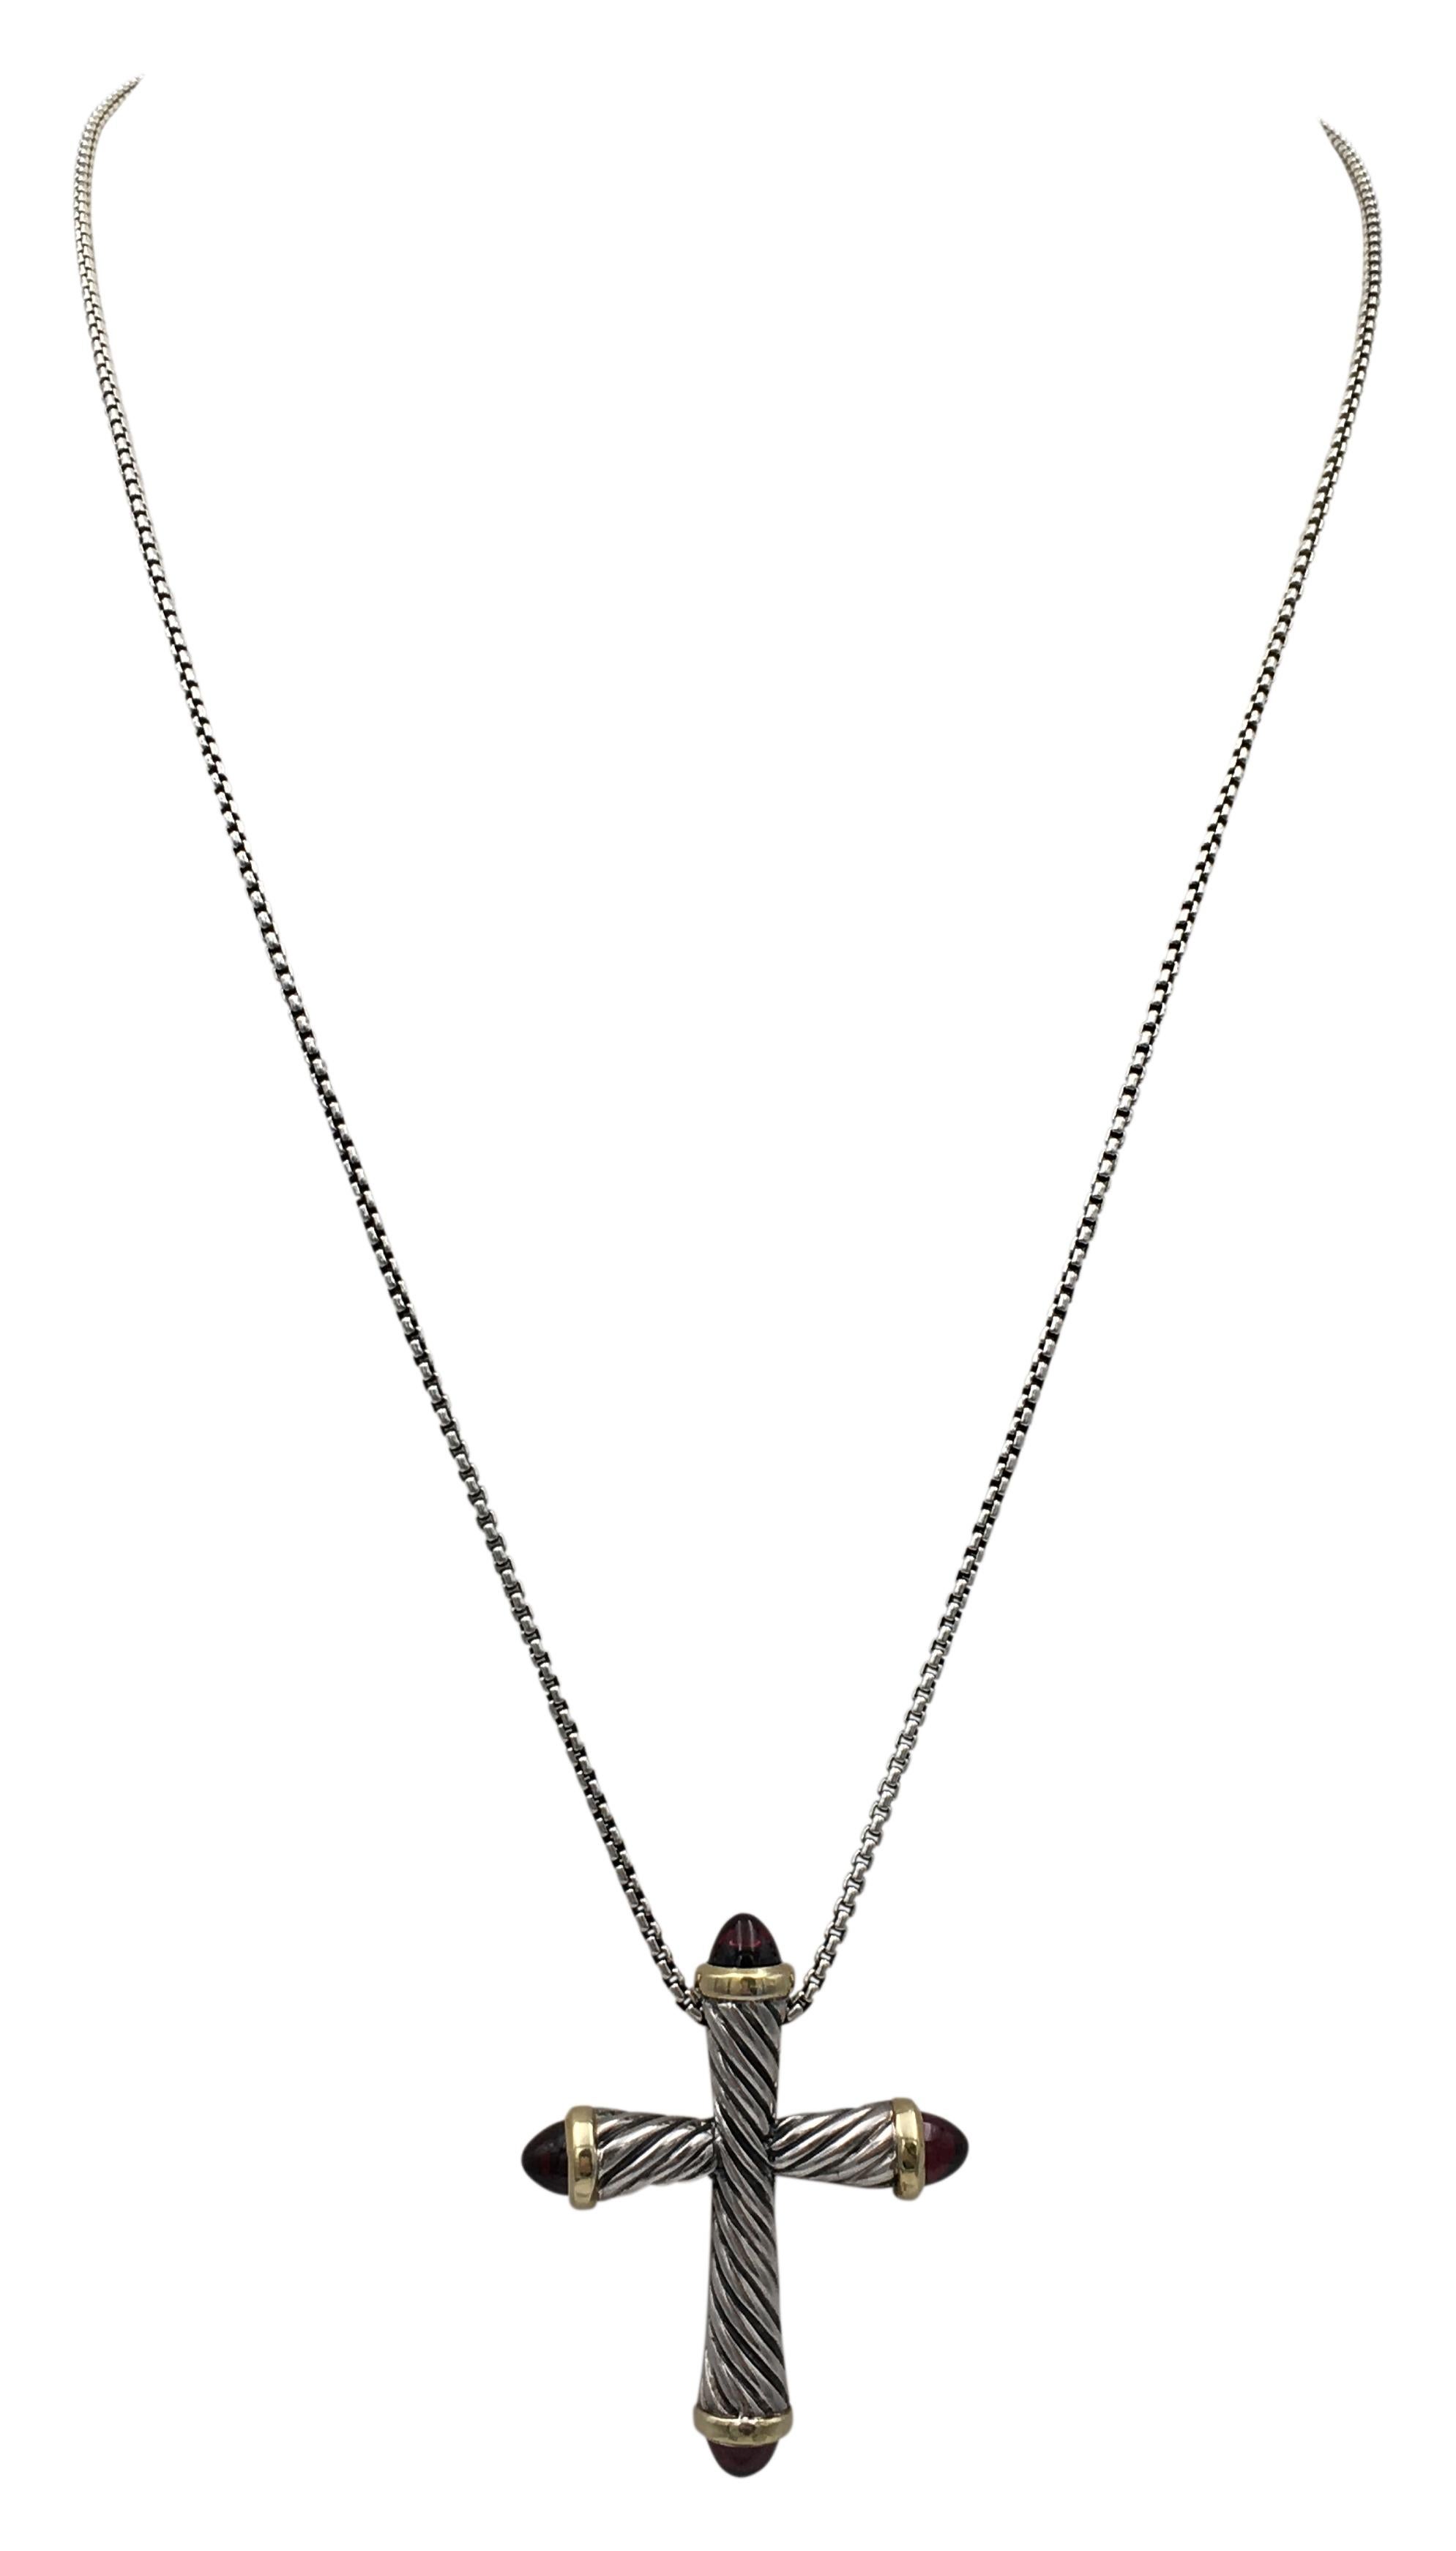 Authentic David Yurman Necklace crafted in sterling silver with 18 karat yellow gold.  A cross-shaped pendant measuring 43mm x 35mm with 4 garnet cabochon points hangs from a 24-inch sterling silver chain.  Signed DY, 925, 750.  CIRCA 2010s